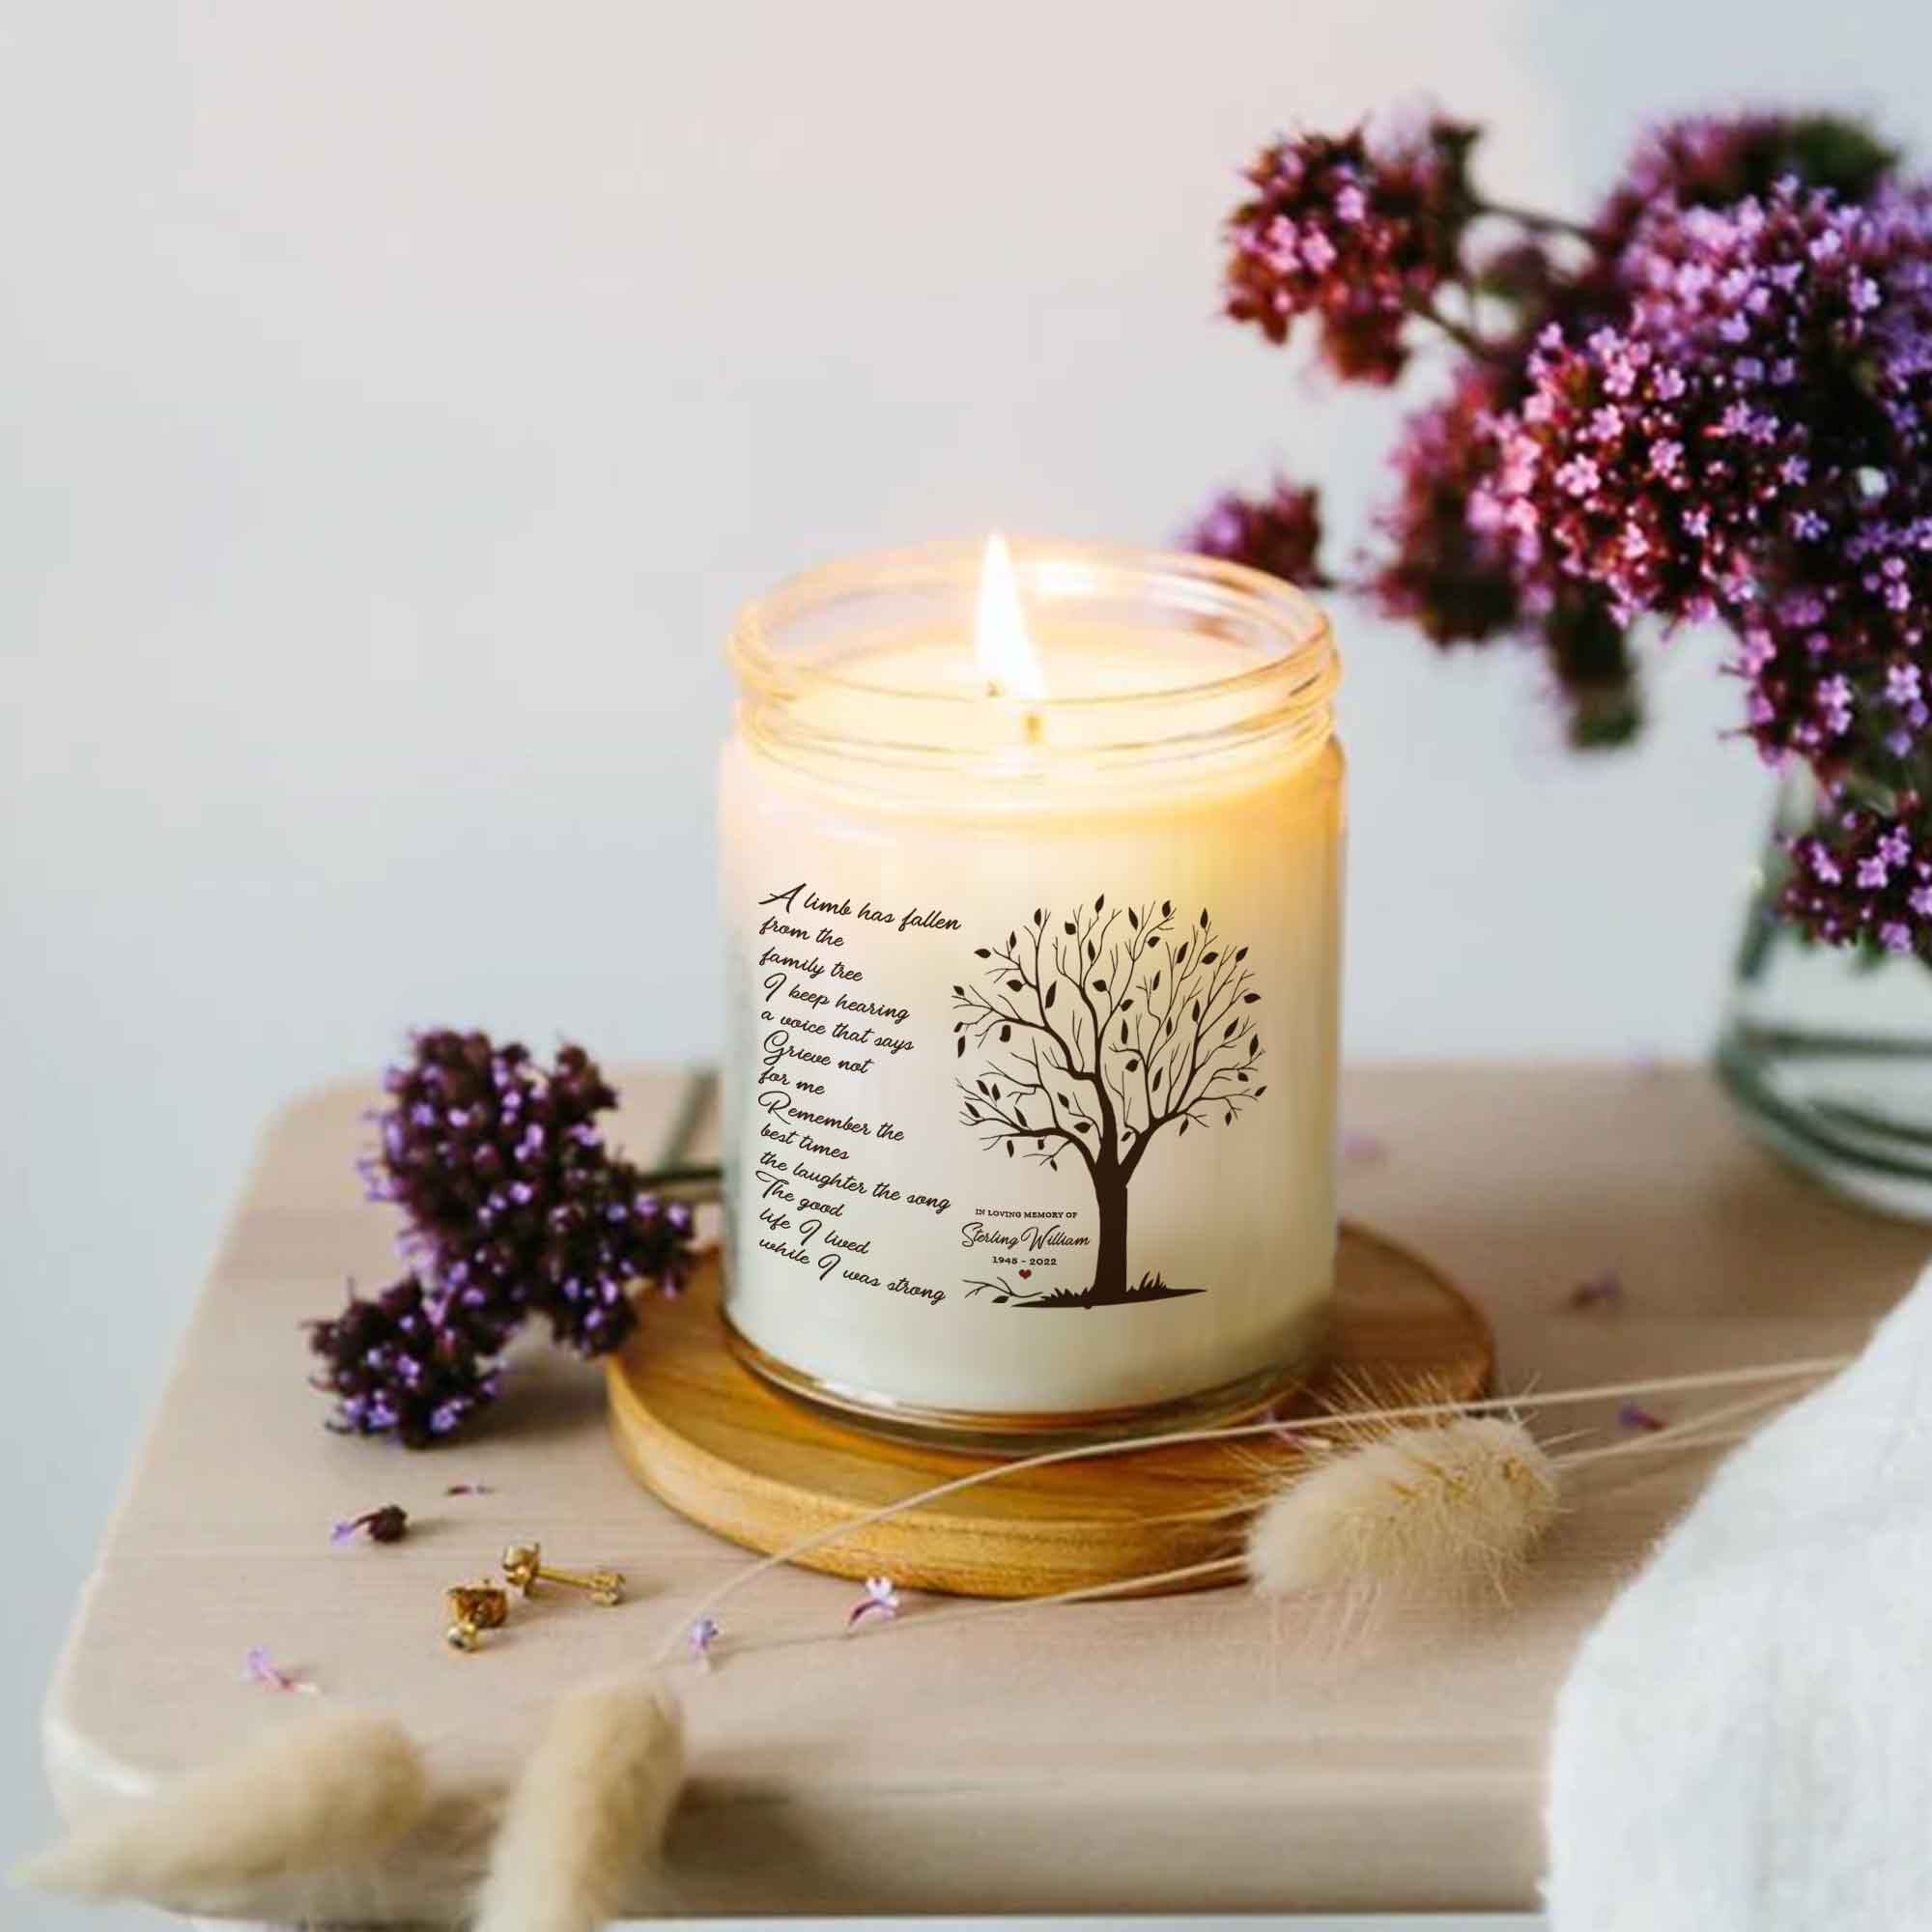 A Limb Has Fallen Memorial Candle, Sympathy Candle Gifts, In Loving Memory Candle